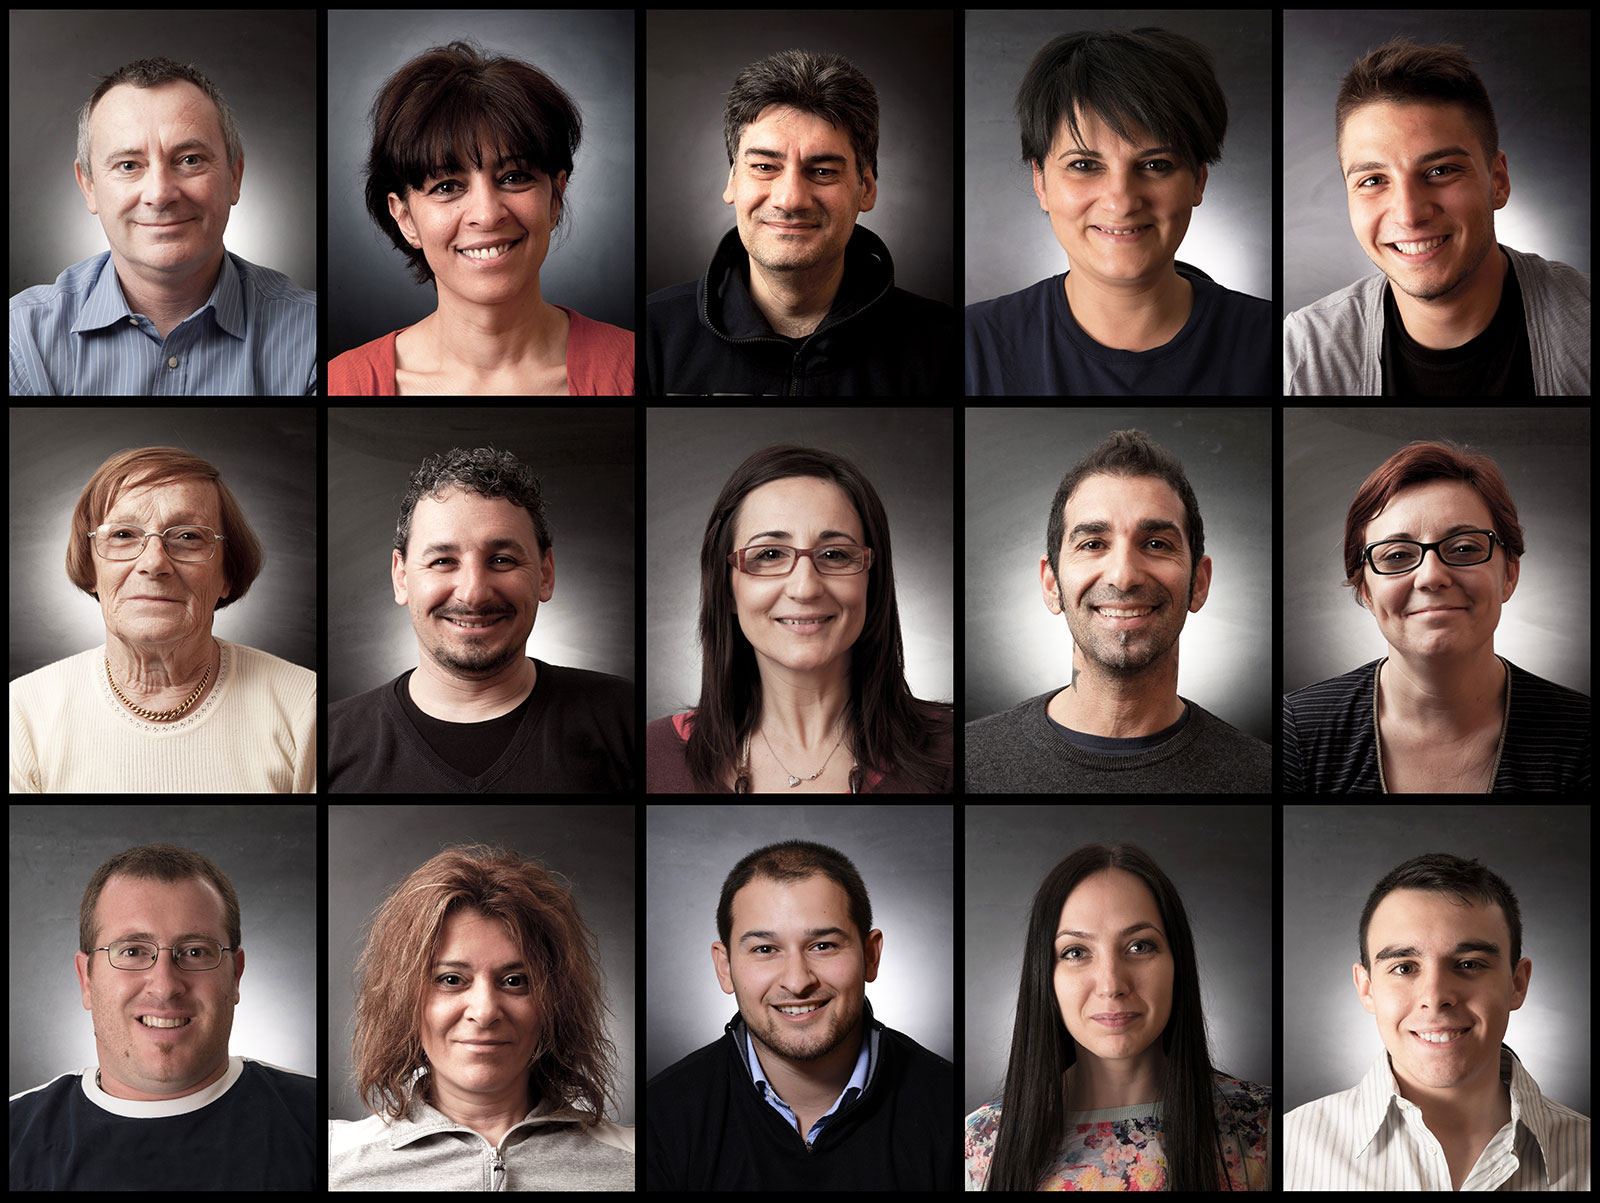 Collage of headshots of diverse adult care providers